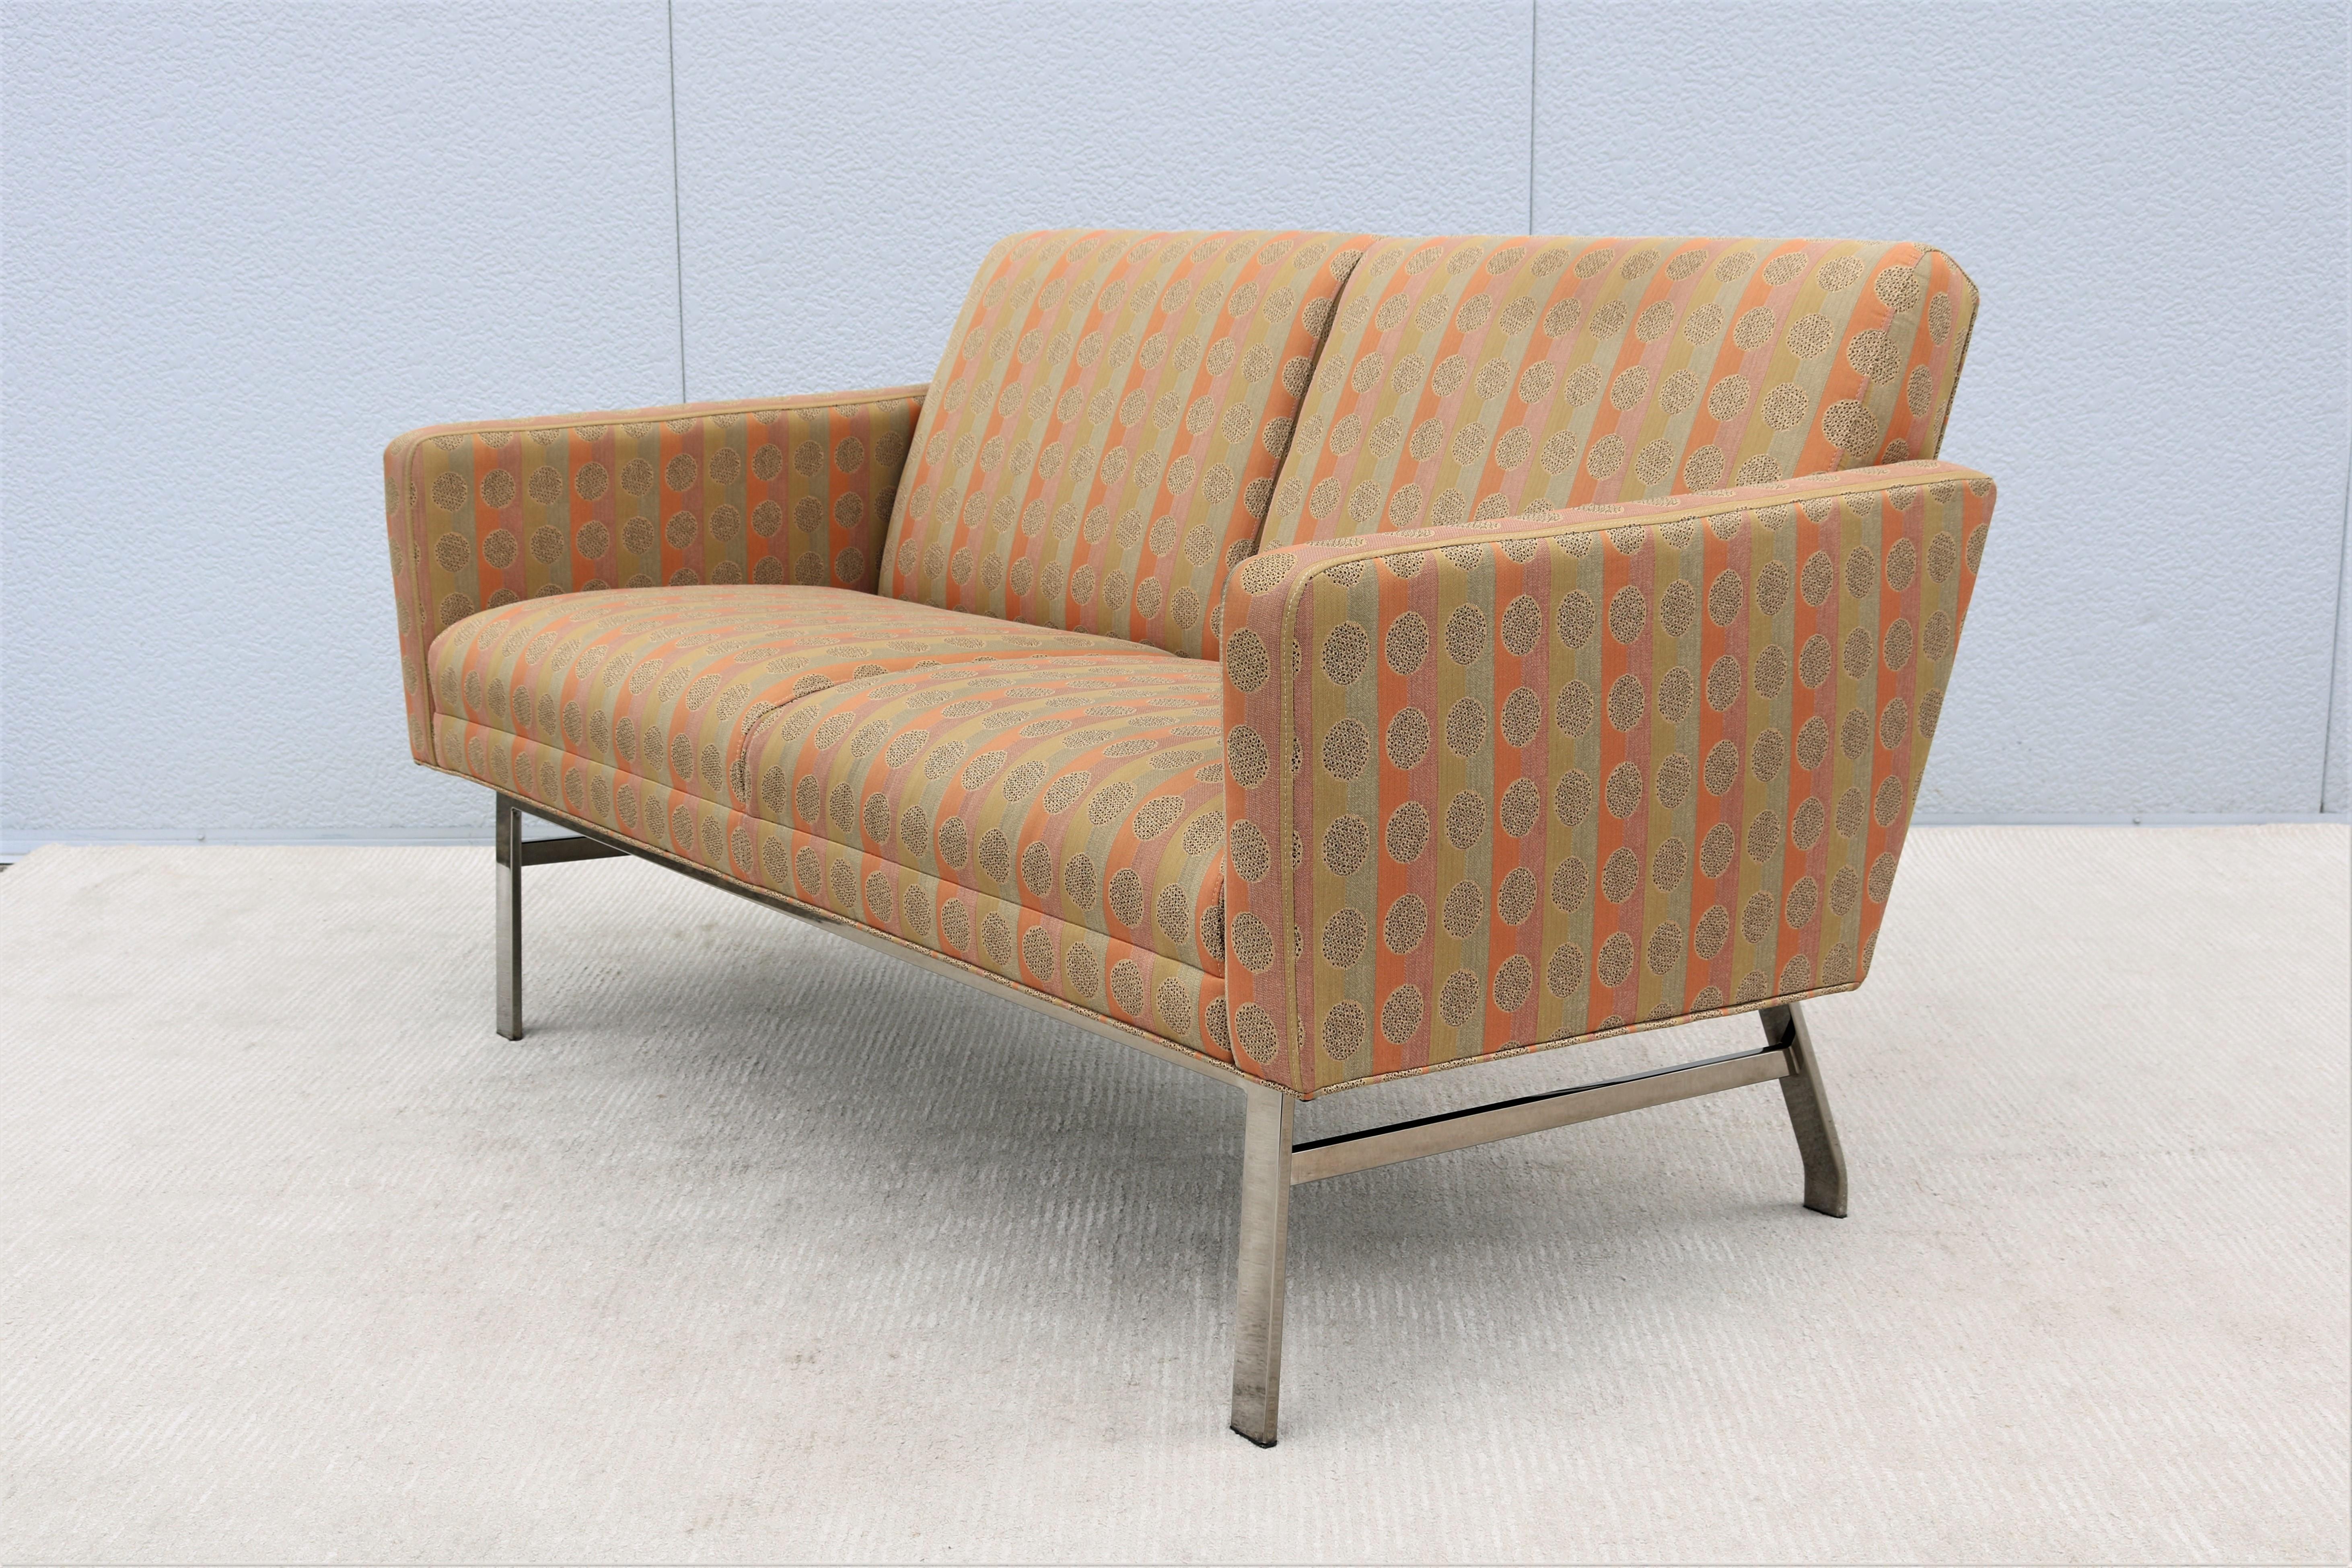 Contemporary Mid-Century Modern Style Jack Cartwright Kelly Settee 2 Seats Sofa, 2 Available For Sale